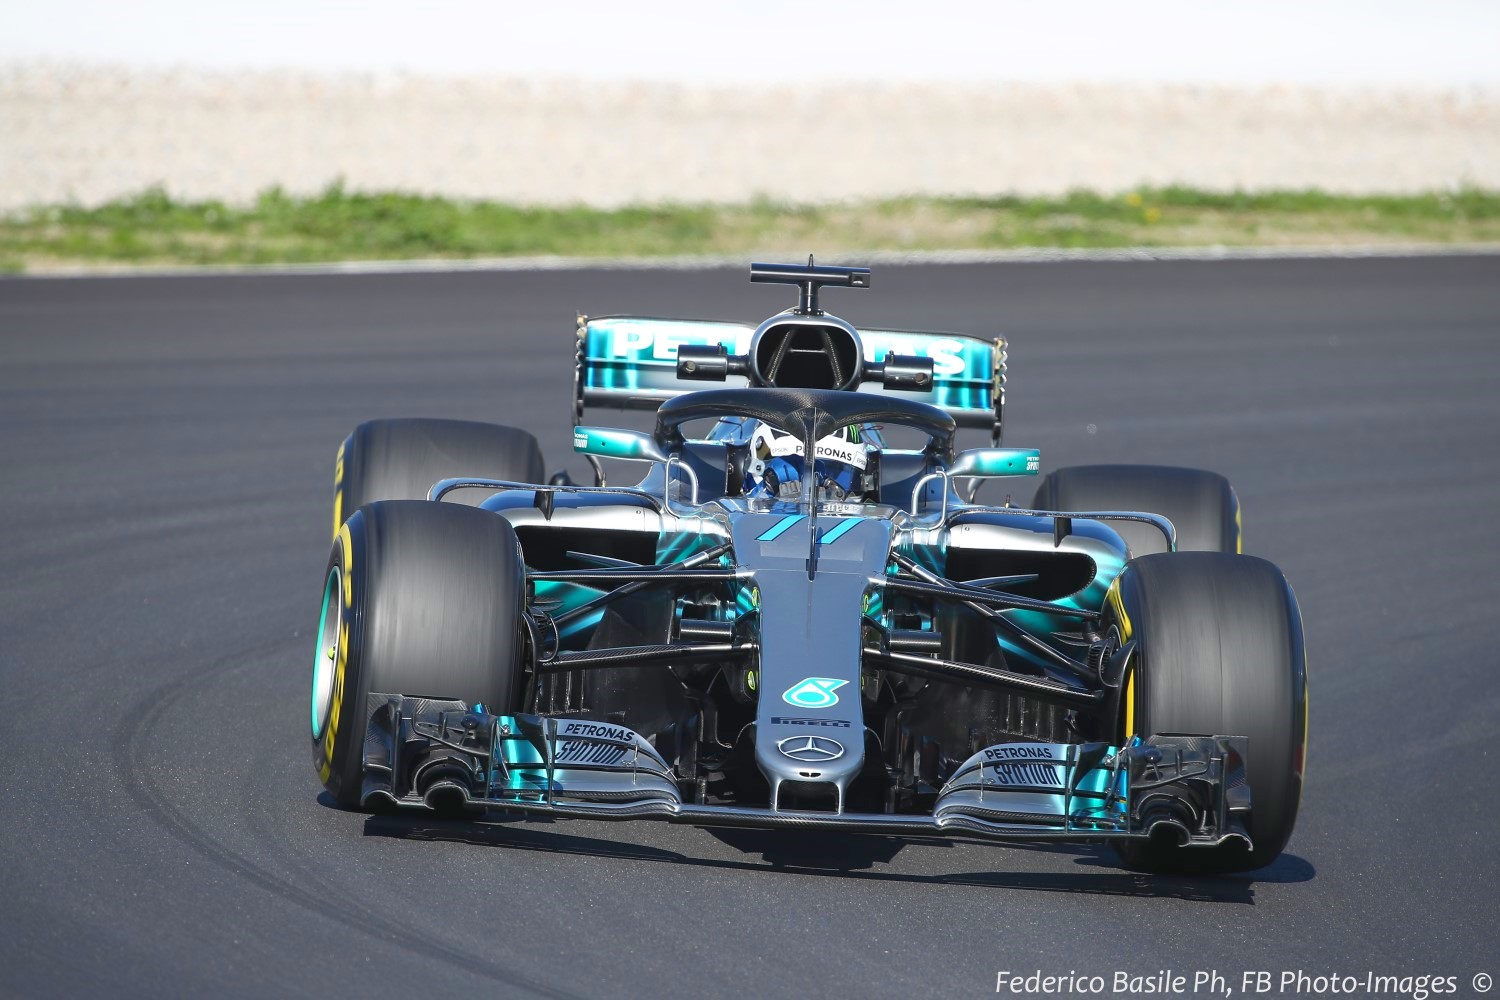 Bottas was 2nd quick for Mercedes, but he was sandbagging